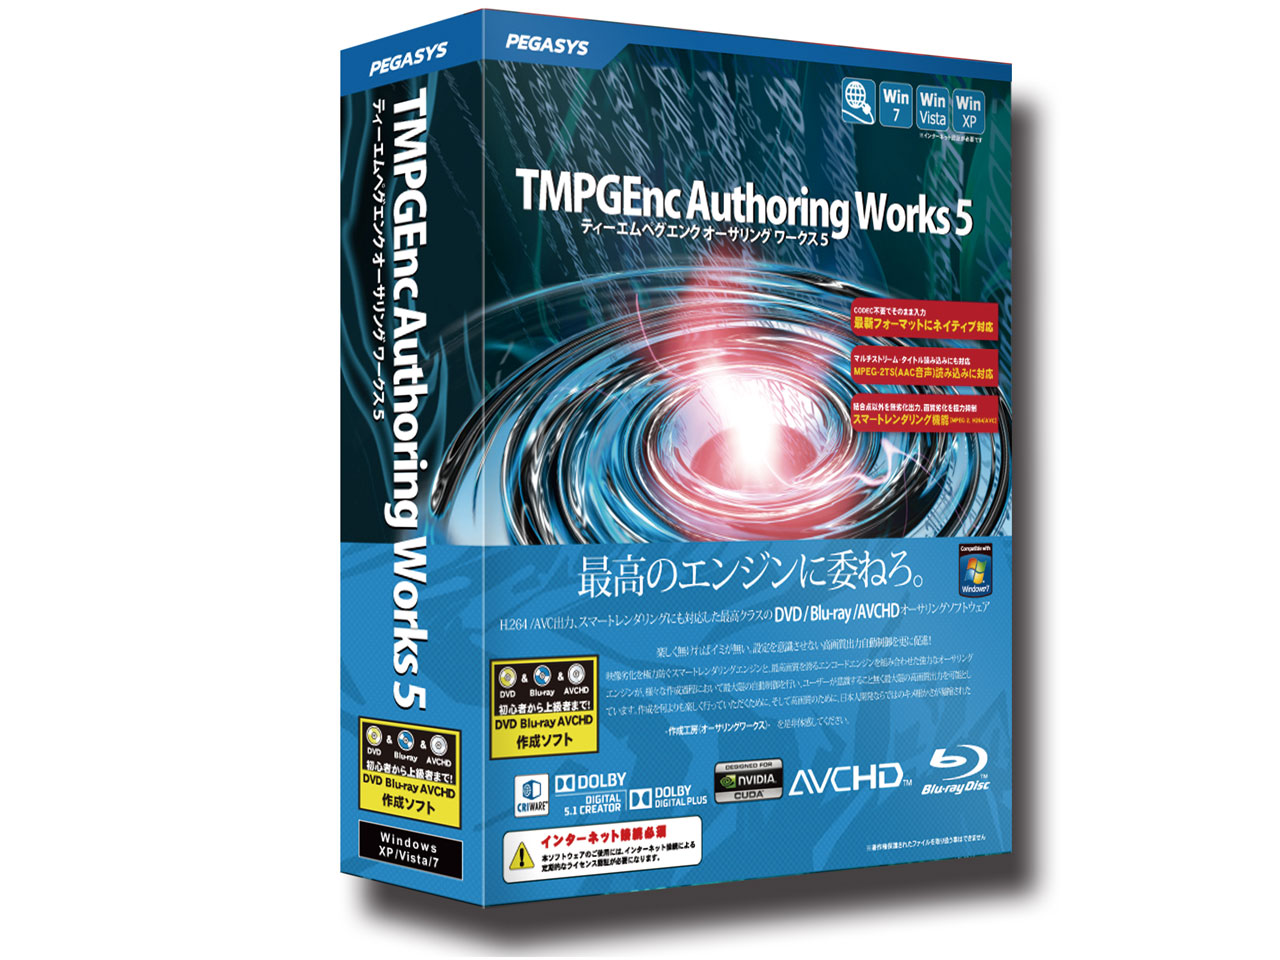 tmpgenc authoring works 4.0.7.32 torrent